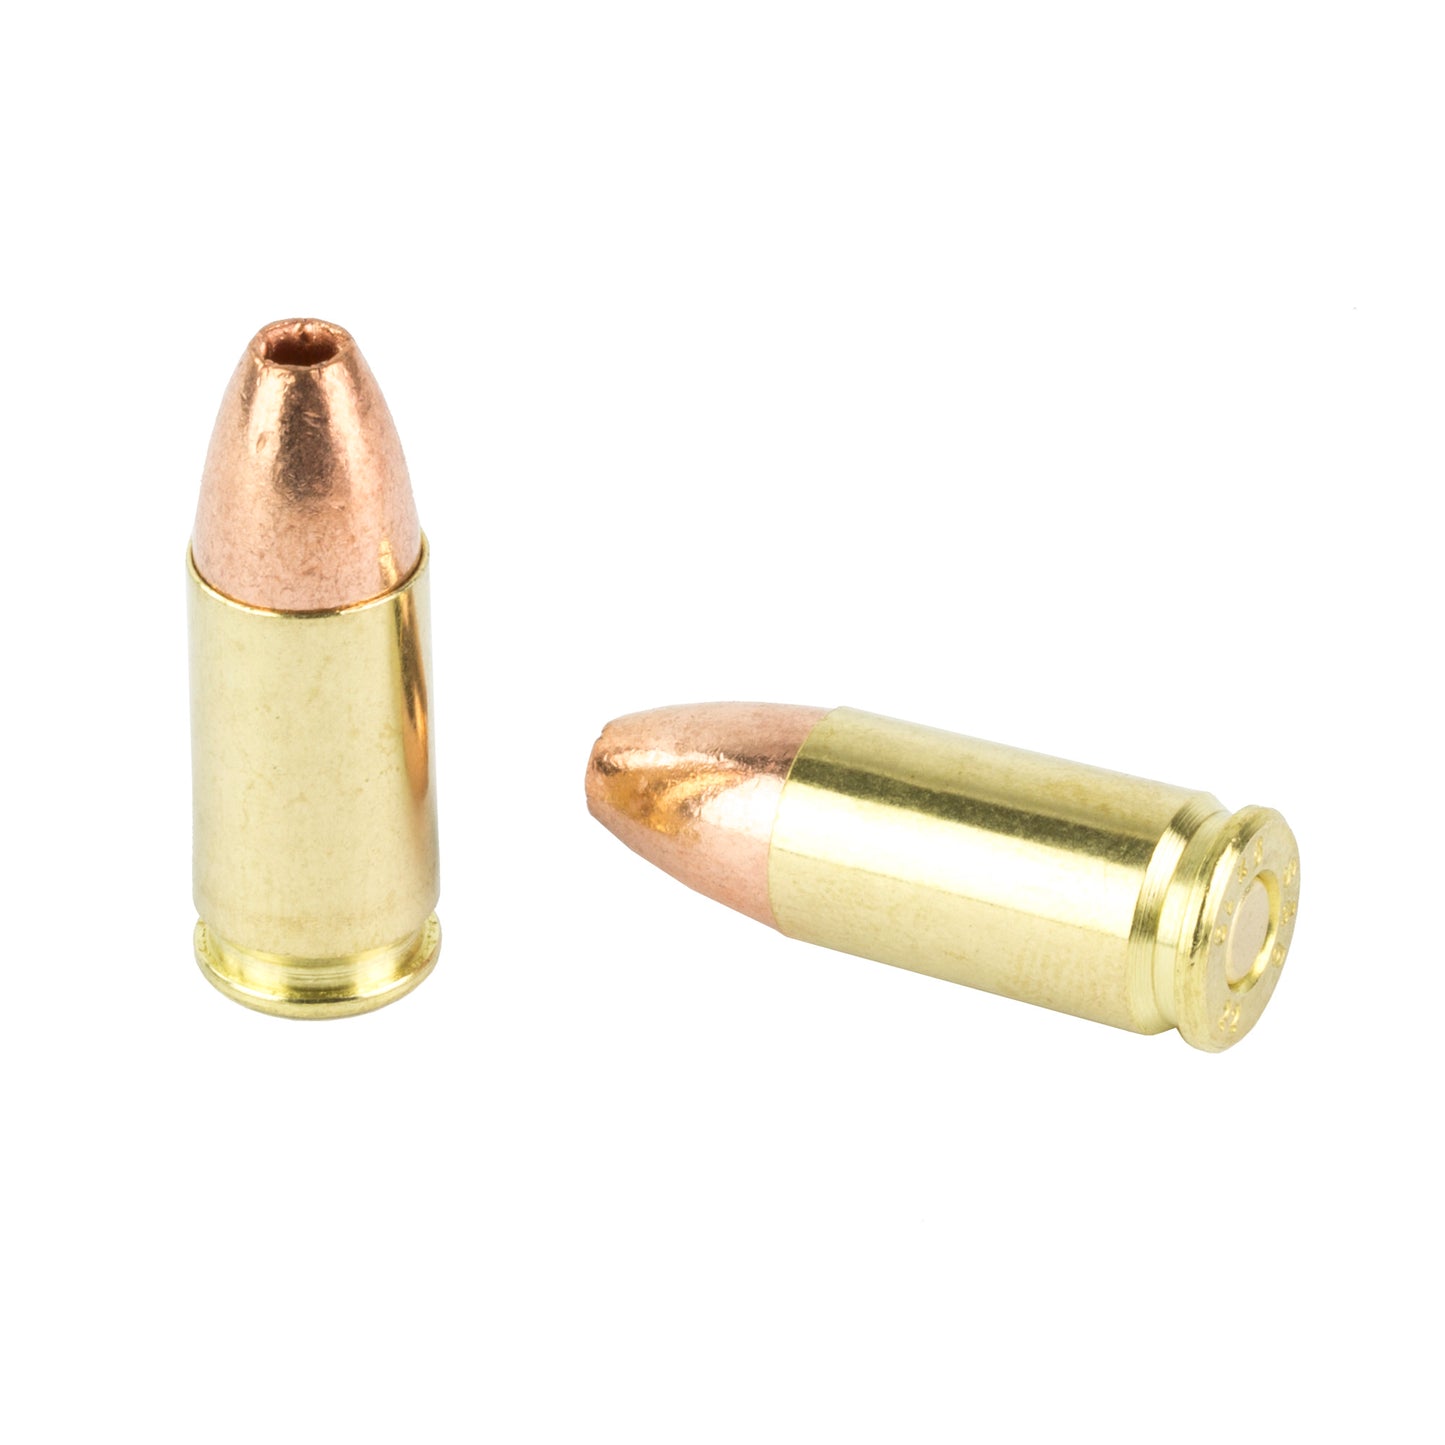 Sellier & Bellot, XRG, 9MM, 100 Grain, Jacketed Hollow Point, 25 Round Box